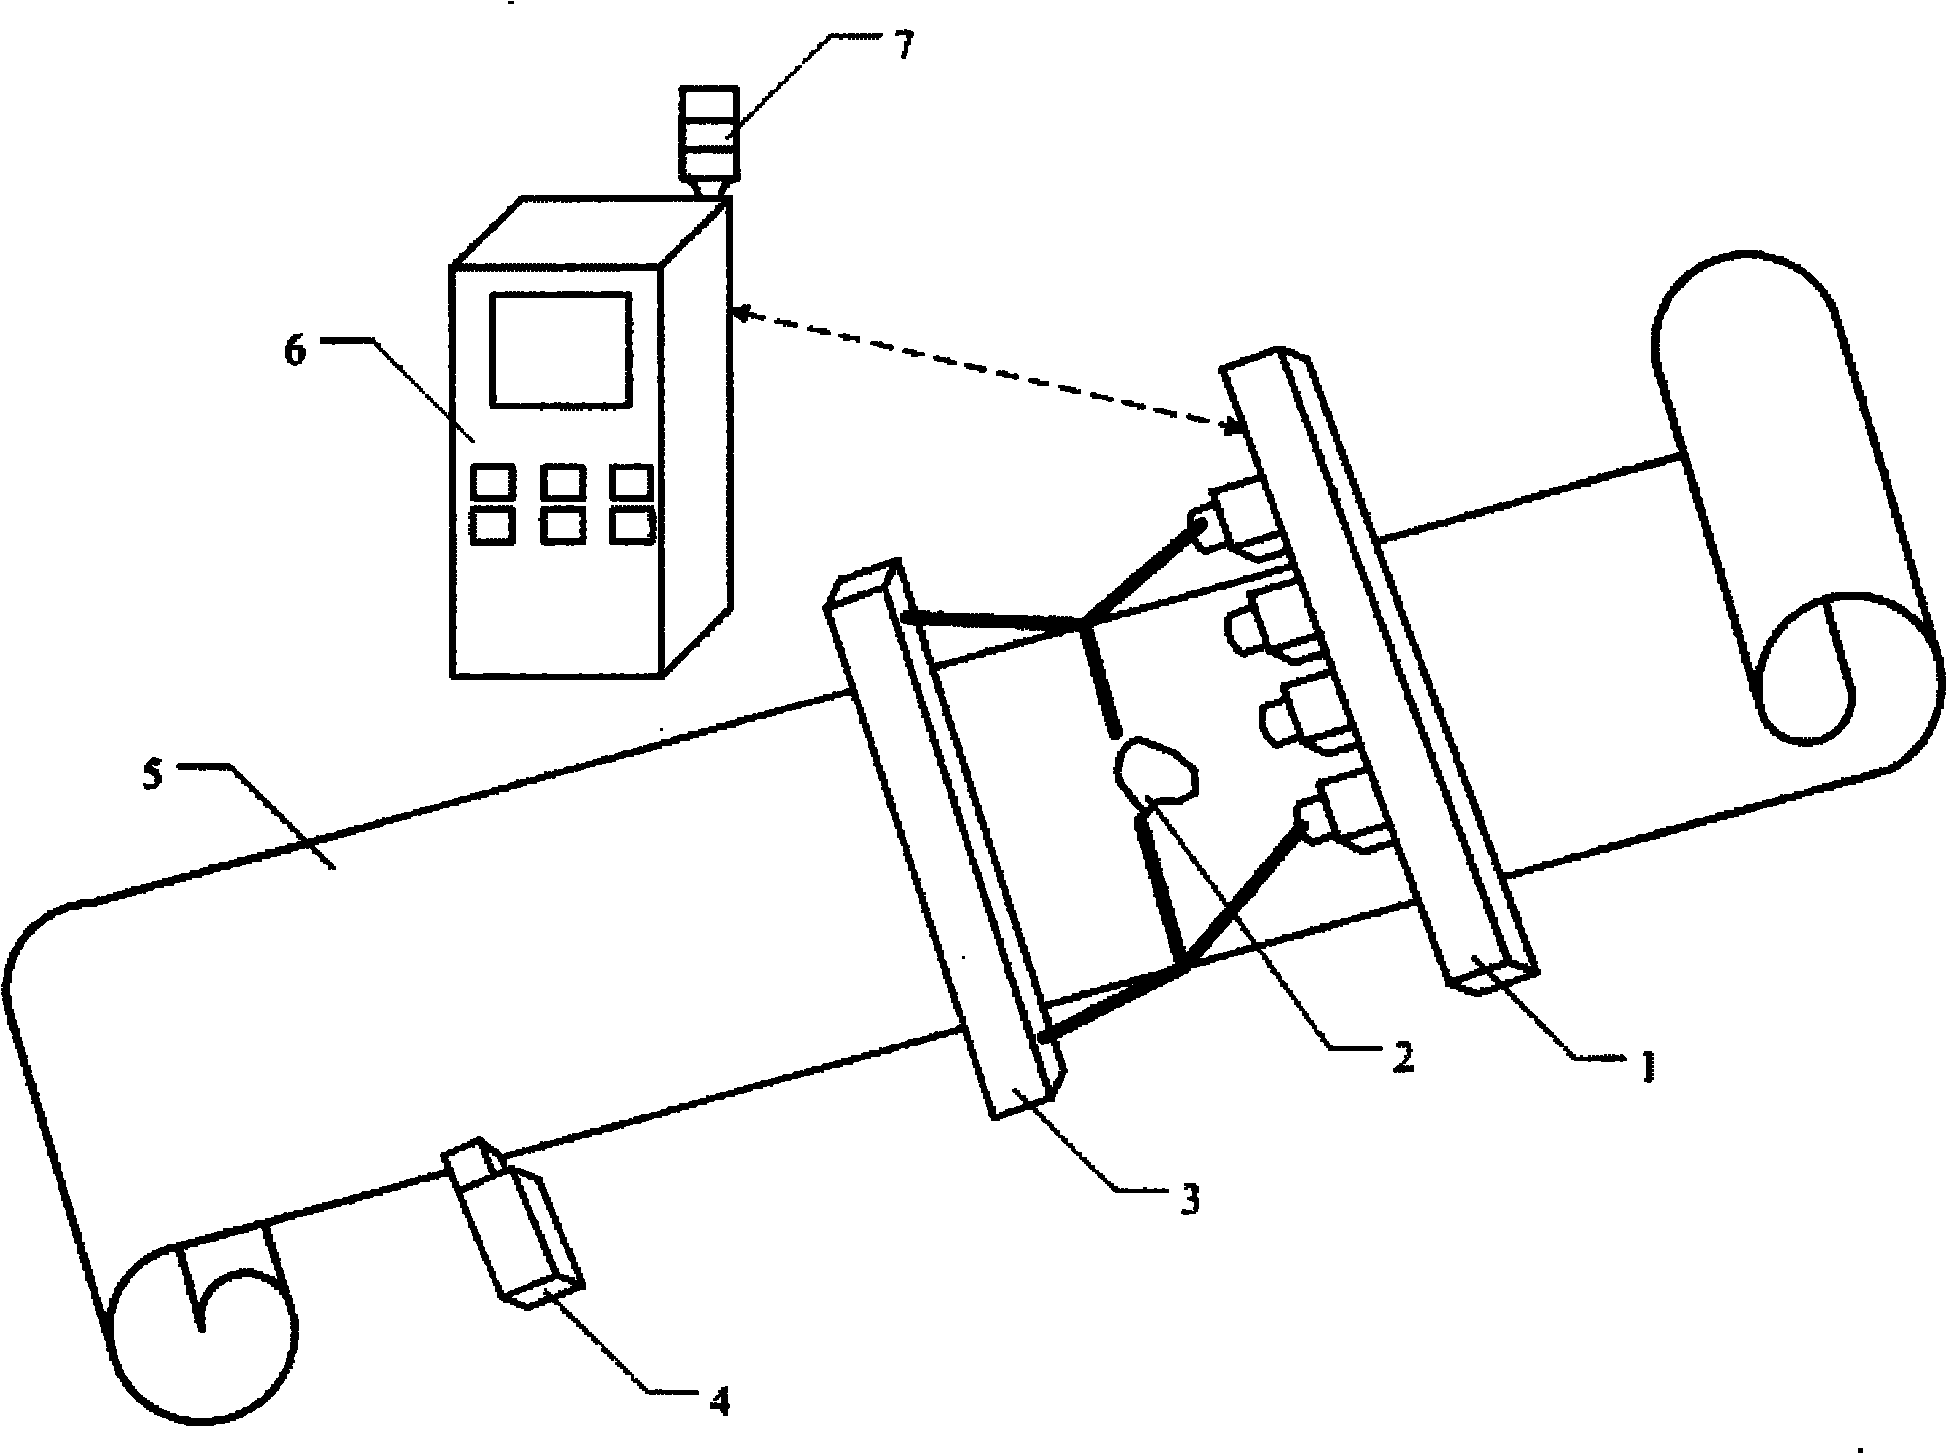 Image processing system for surface detection of coiled material